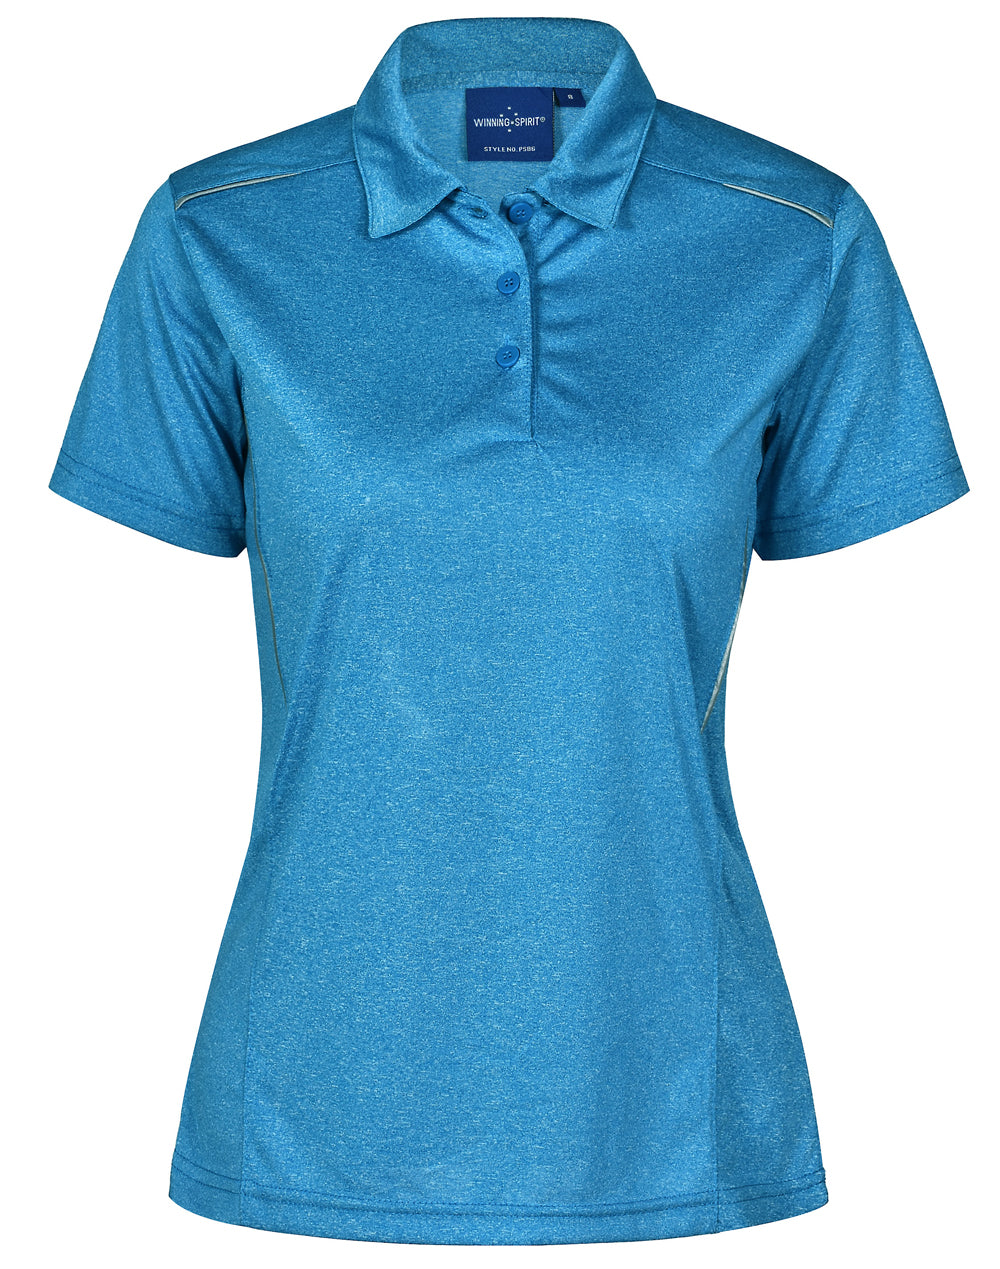 HARLAND POLO Ladies PS86